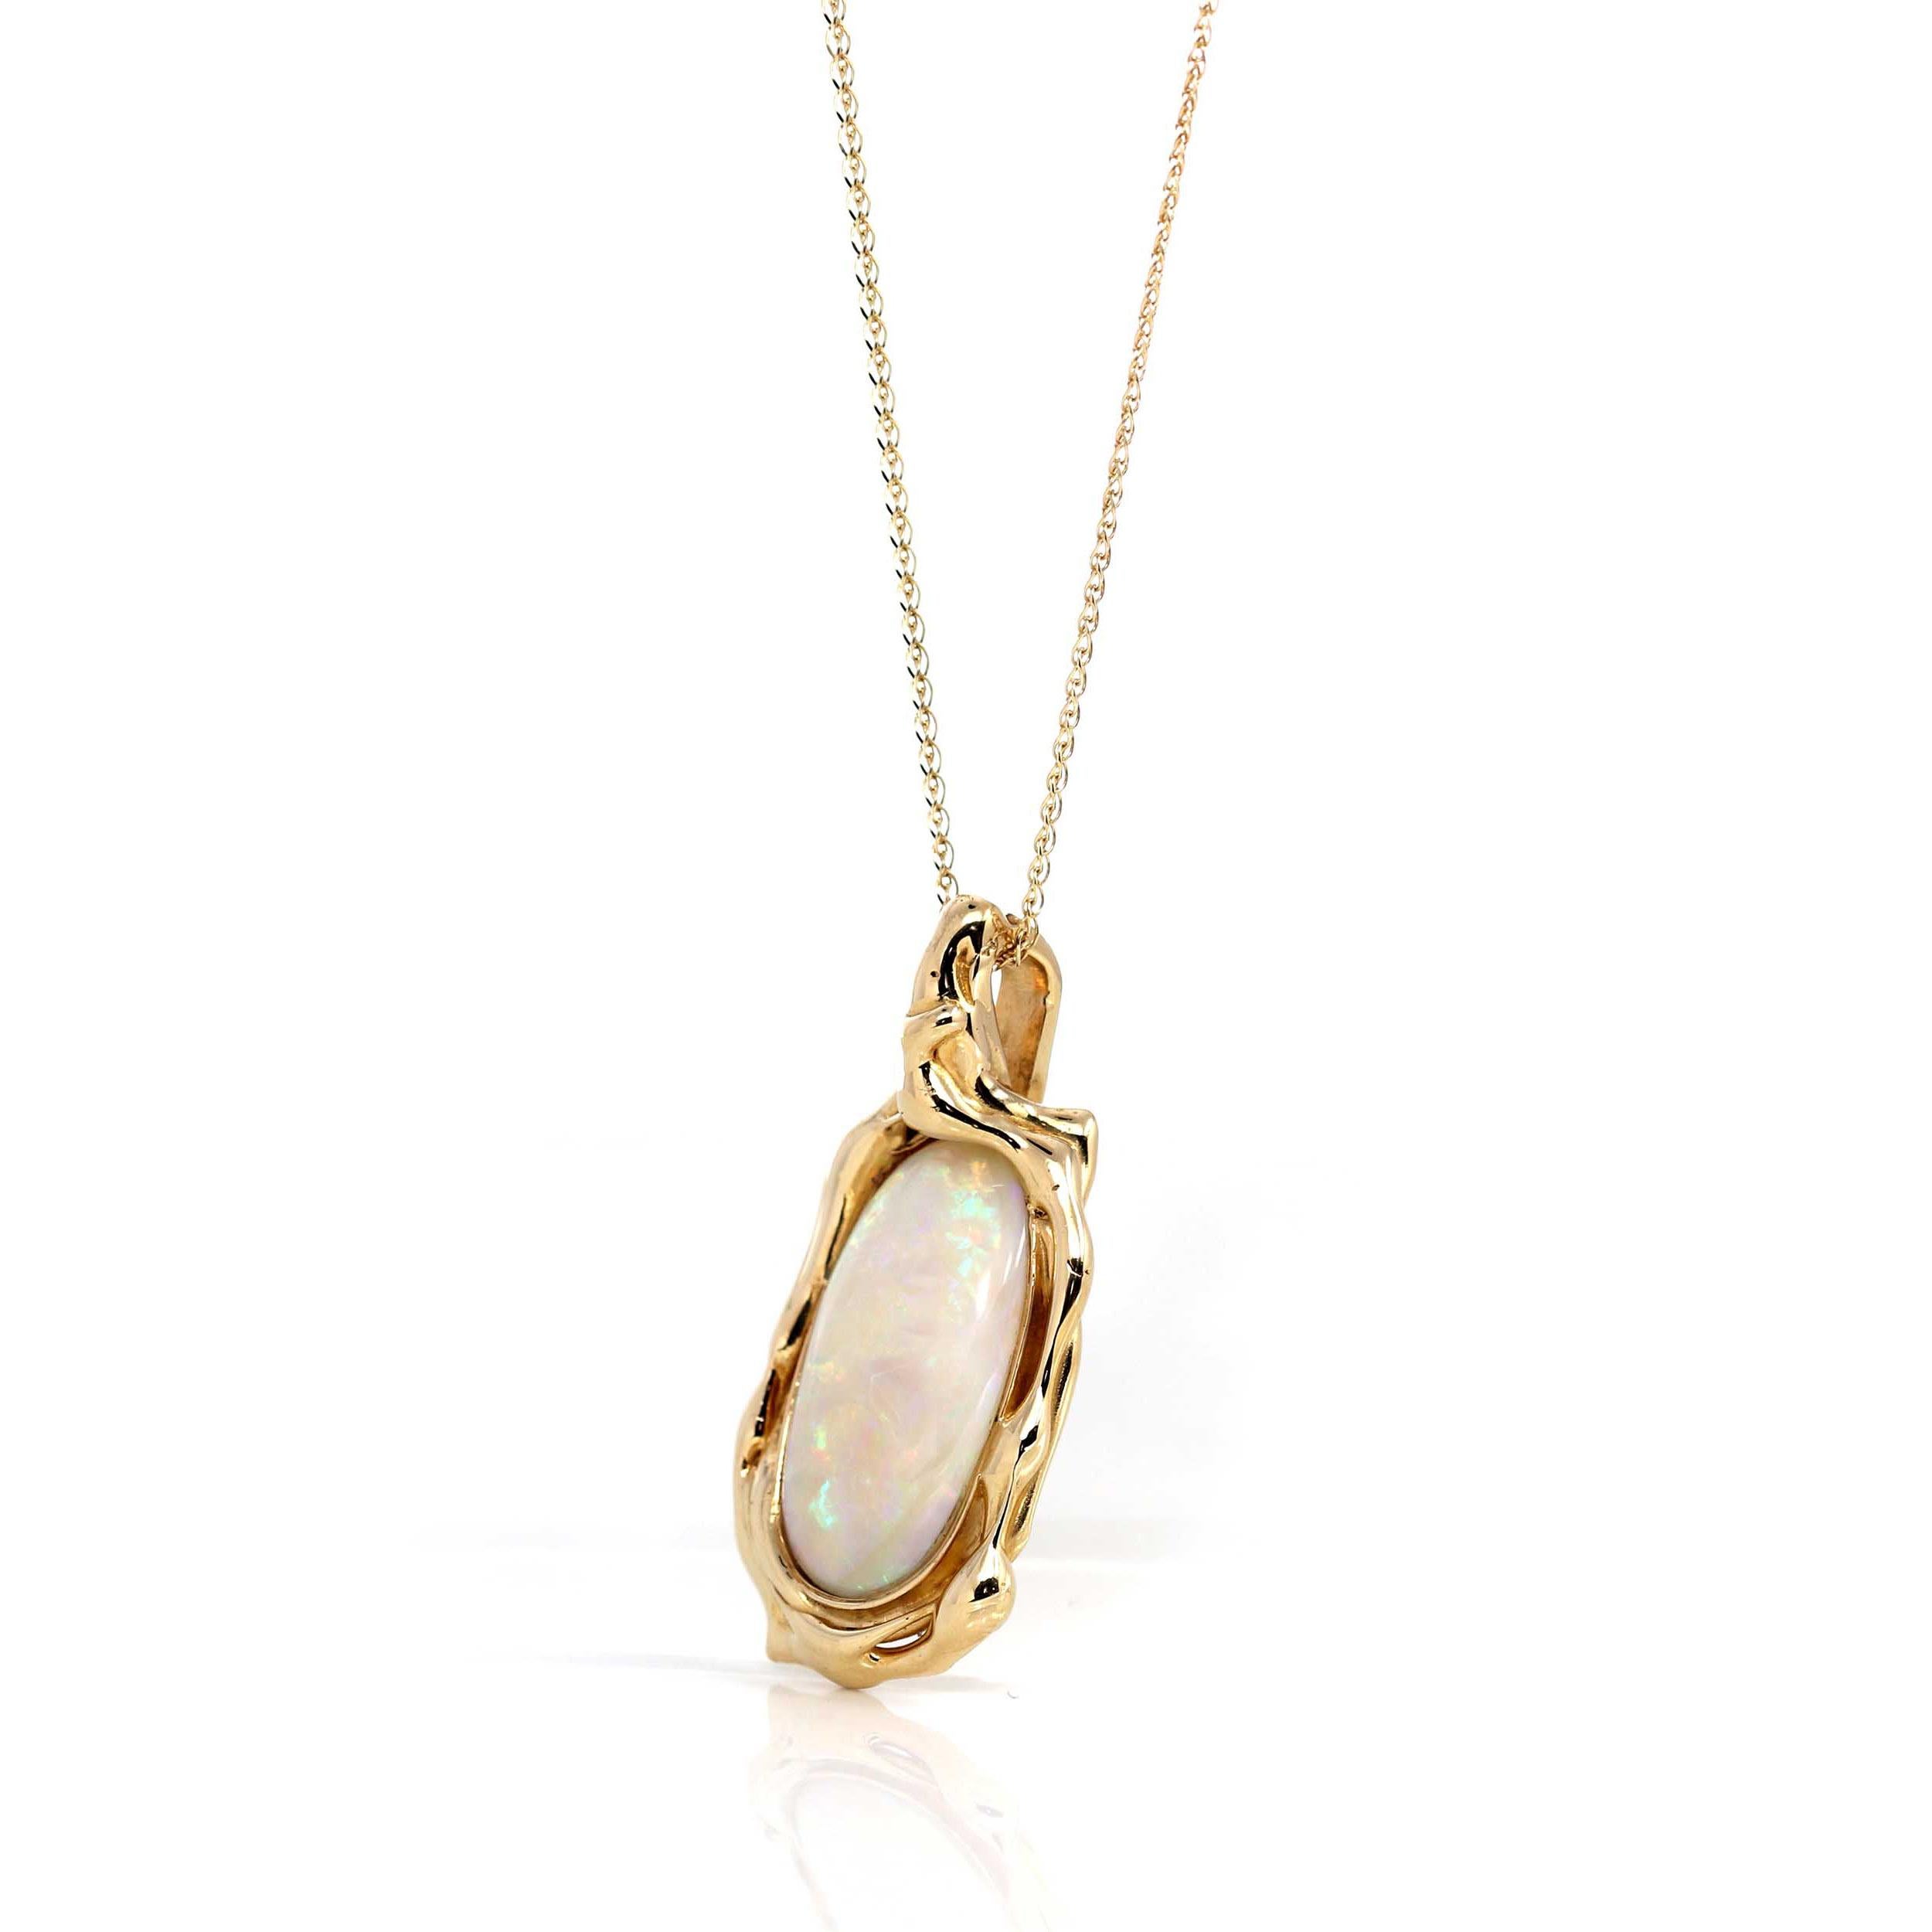 Design Concept--- Part of Baikalla's genuine gemstone jewelry collection. This beautiful genuine Australian opal's beauty is brought out by this gorgeous freeform bezel-set mounting. This is truly a piece for gemstone lovers. Pair with a natural